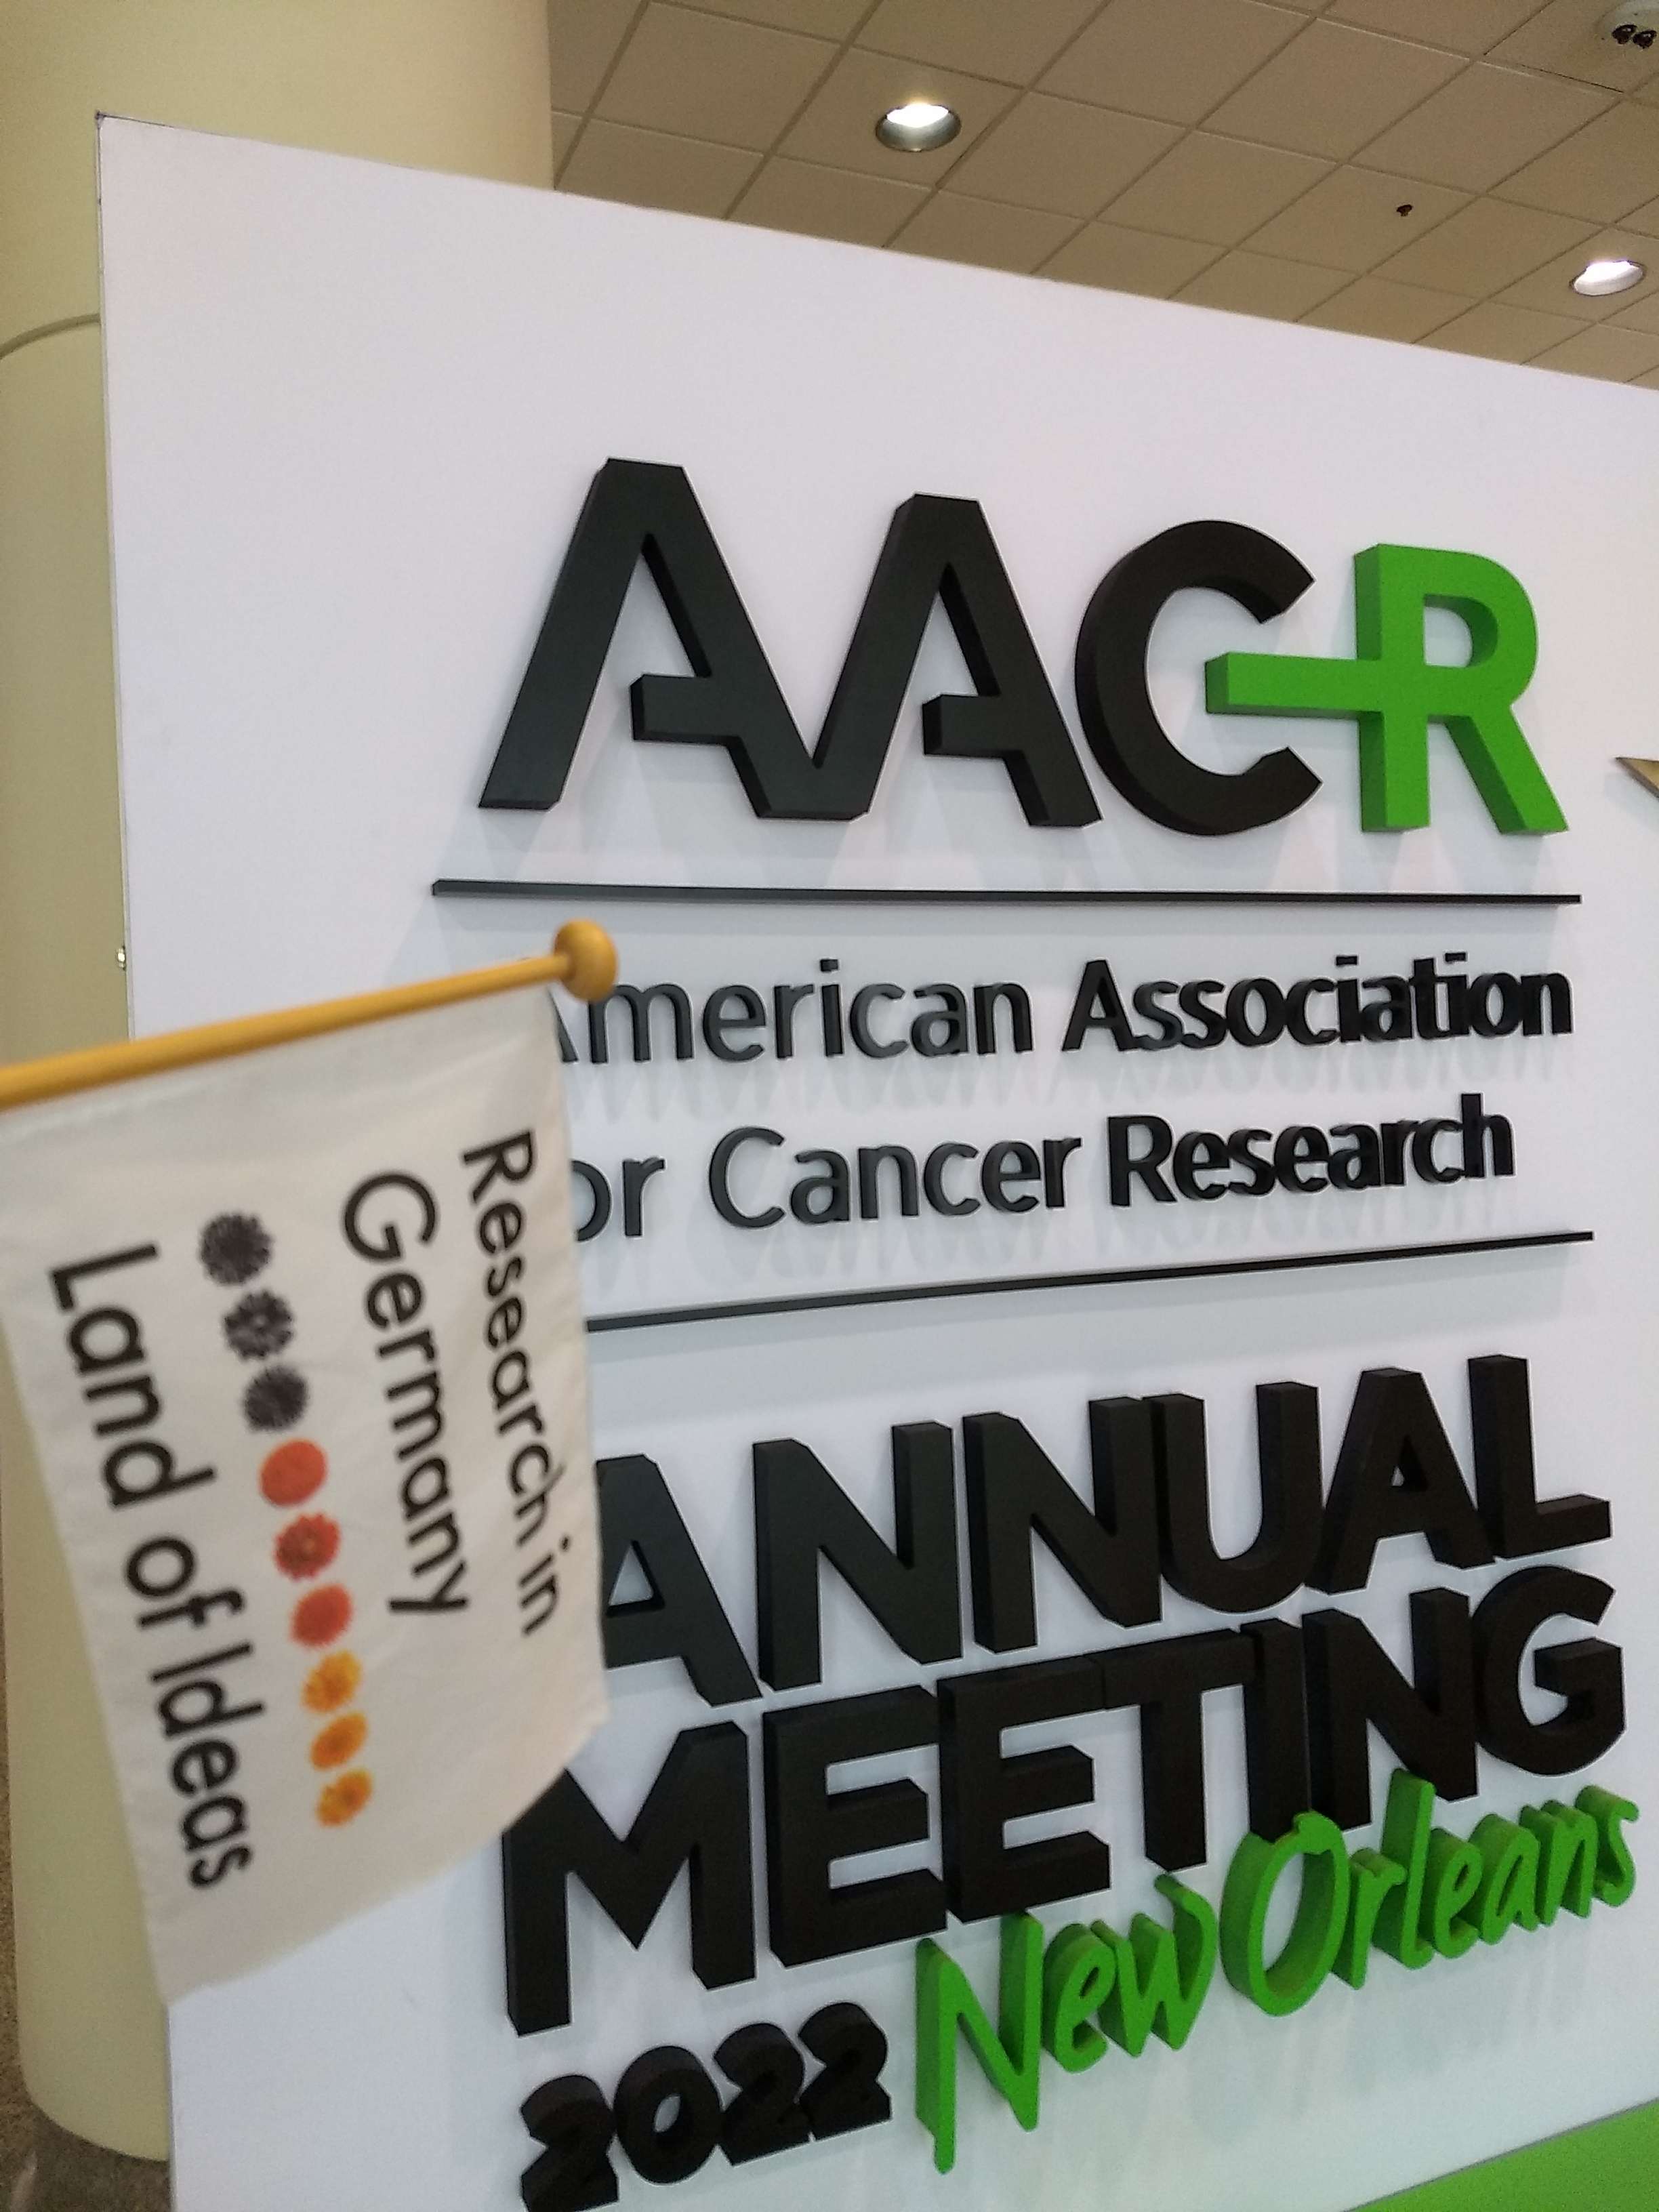 “Research in Germany” at the AACR March Meeting 2022